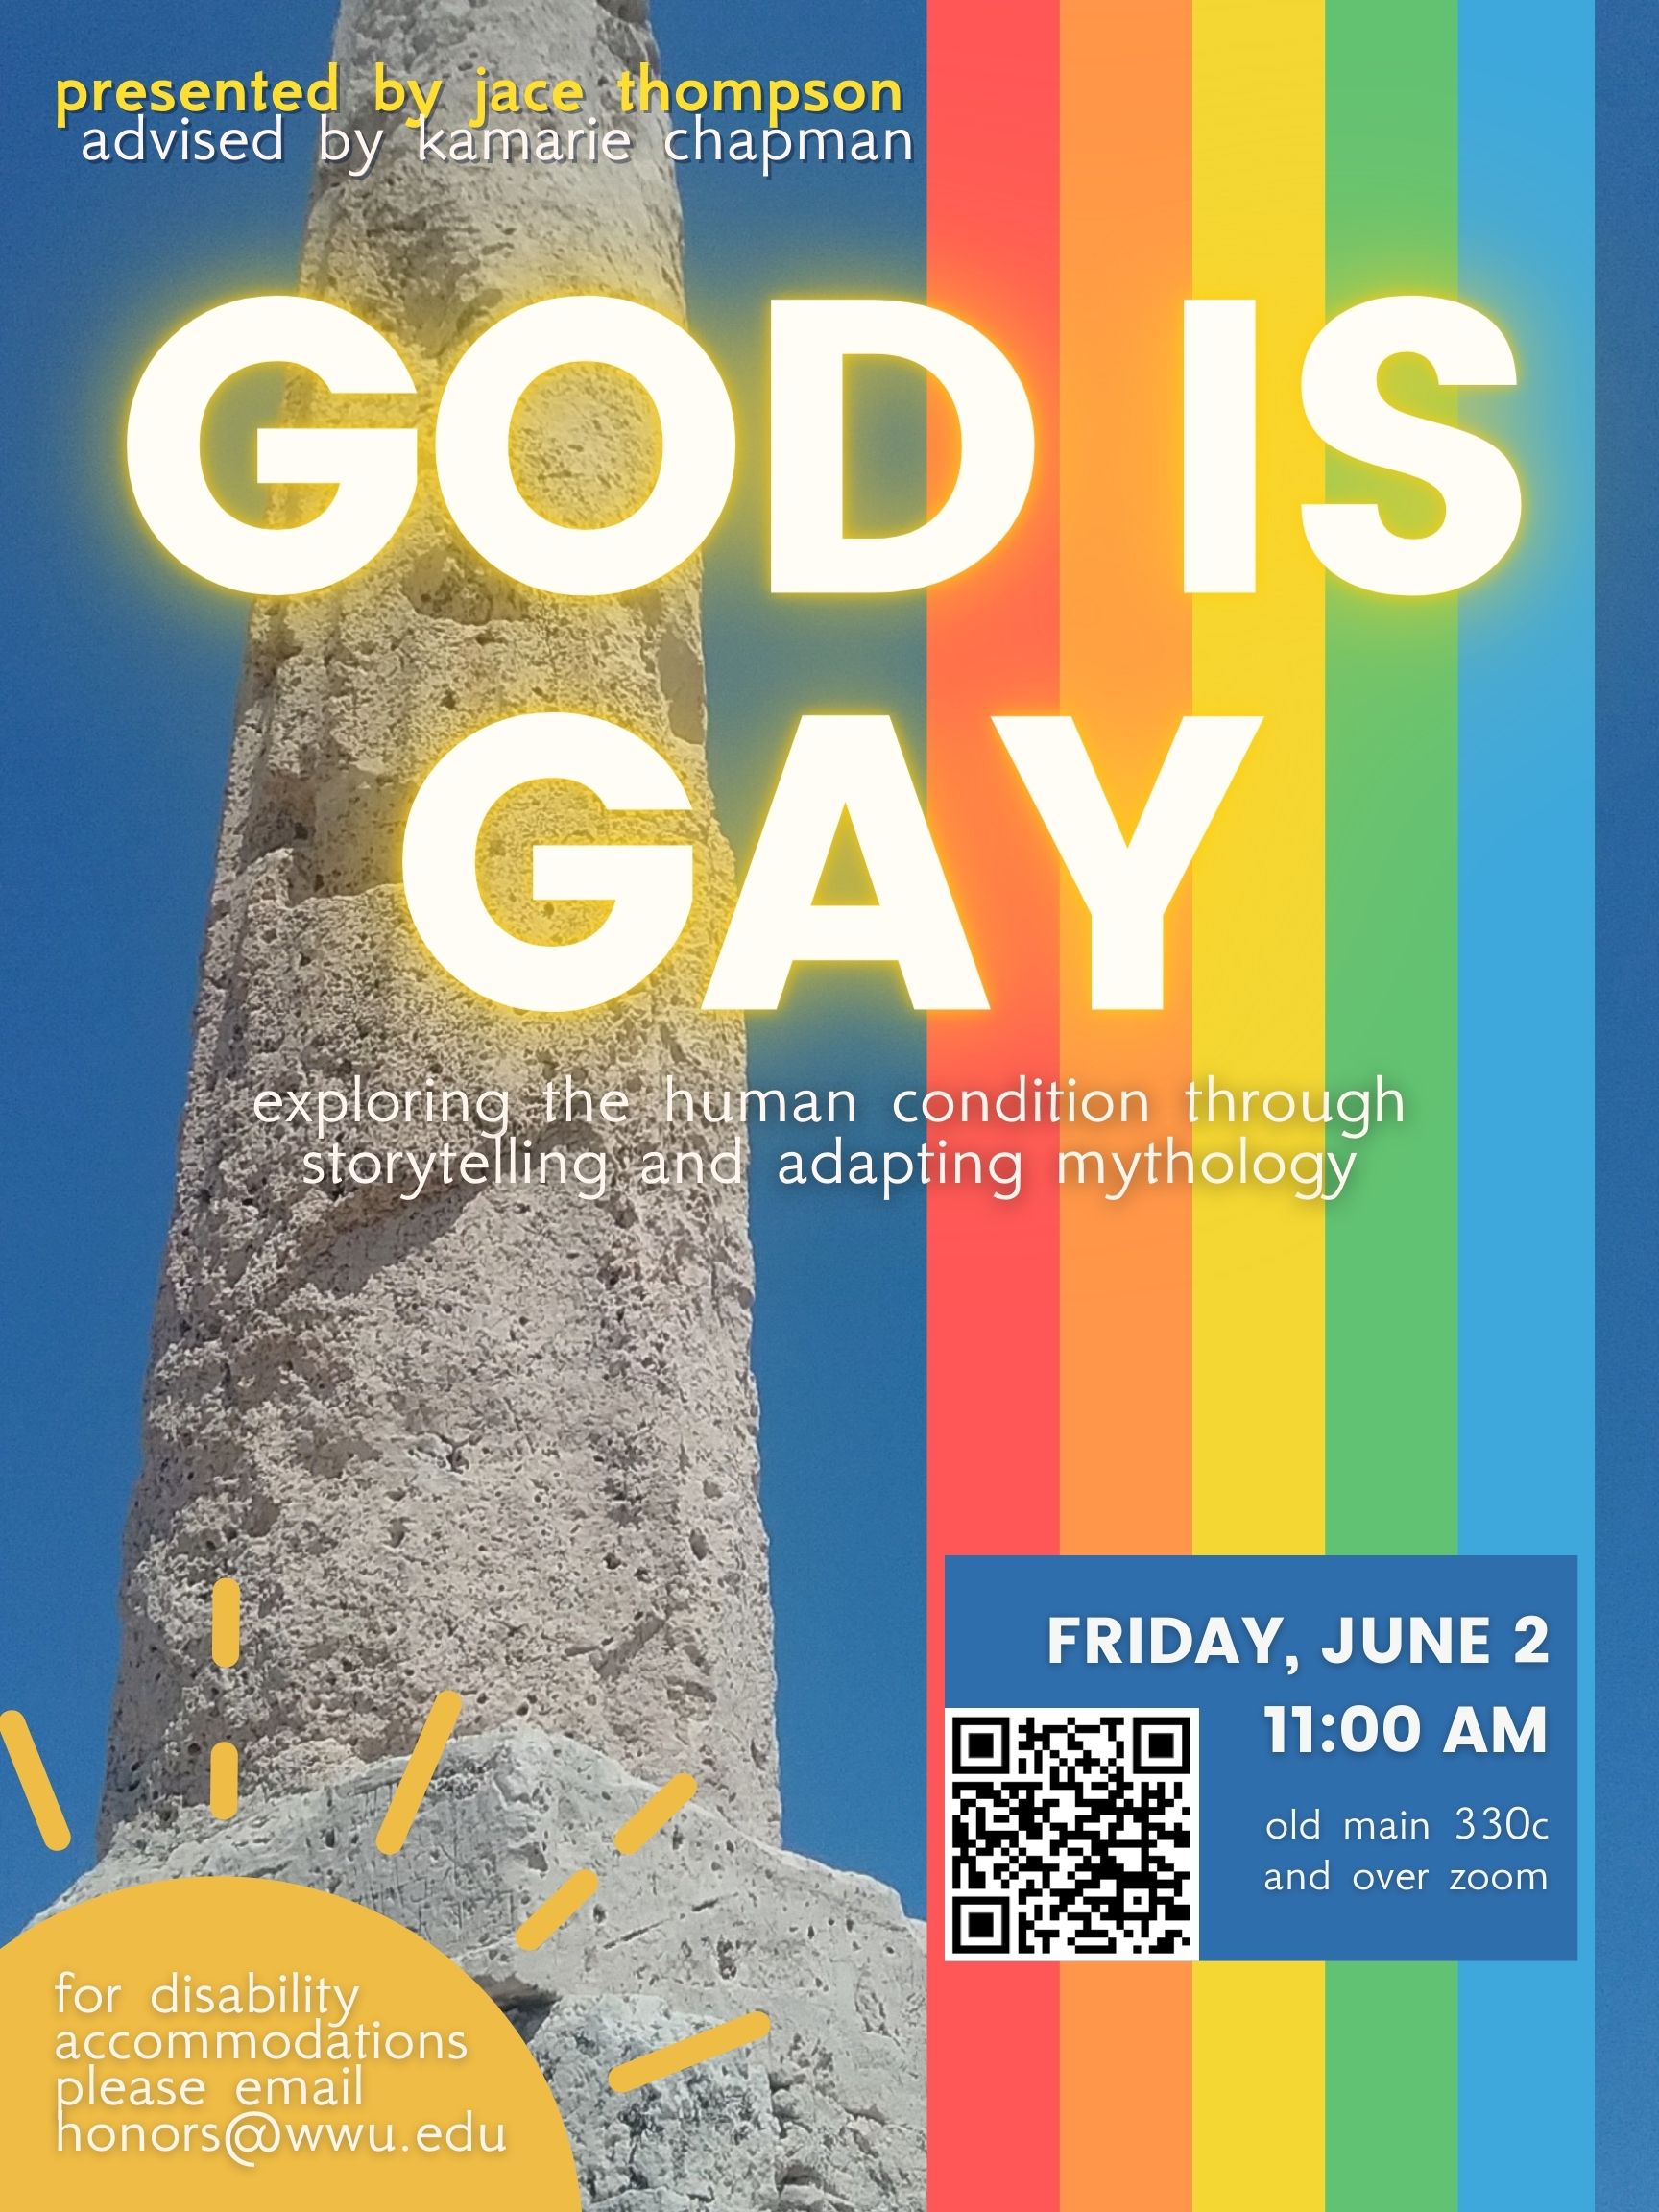 A poster with a photo of a column from ancient Greek ruins, with a rainbow on the right. Text reads: "Presented by Jace Thompson, advised by Kamarie Chapman. God is Gay: Exploring the Human Condition through Storytelling and Adapting Mythology." In the bottom left corner there is a sun with text reading "for disability accommodations please email honors@wwu.edu". On the lower right, a blue box reads "Friday, June 2. 11:00 AM. old main 330c and over zoom" and also contains a QR code with the zoom link.